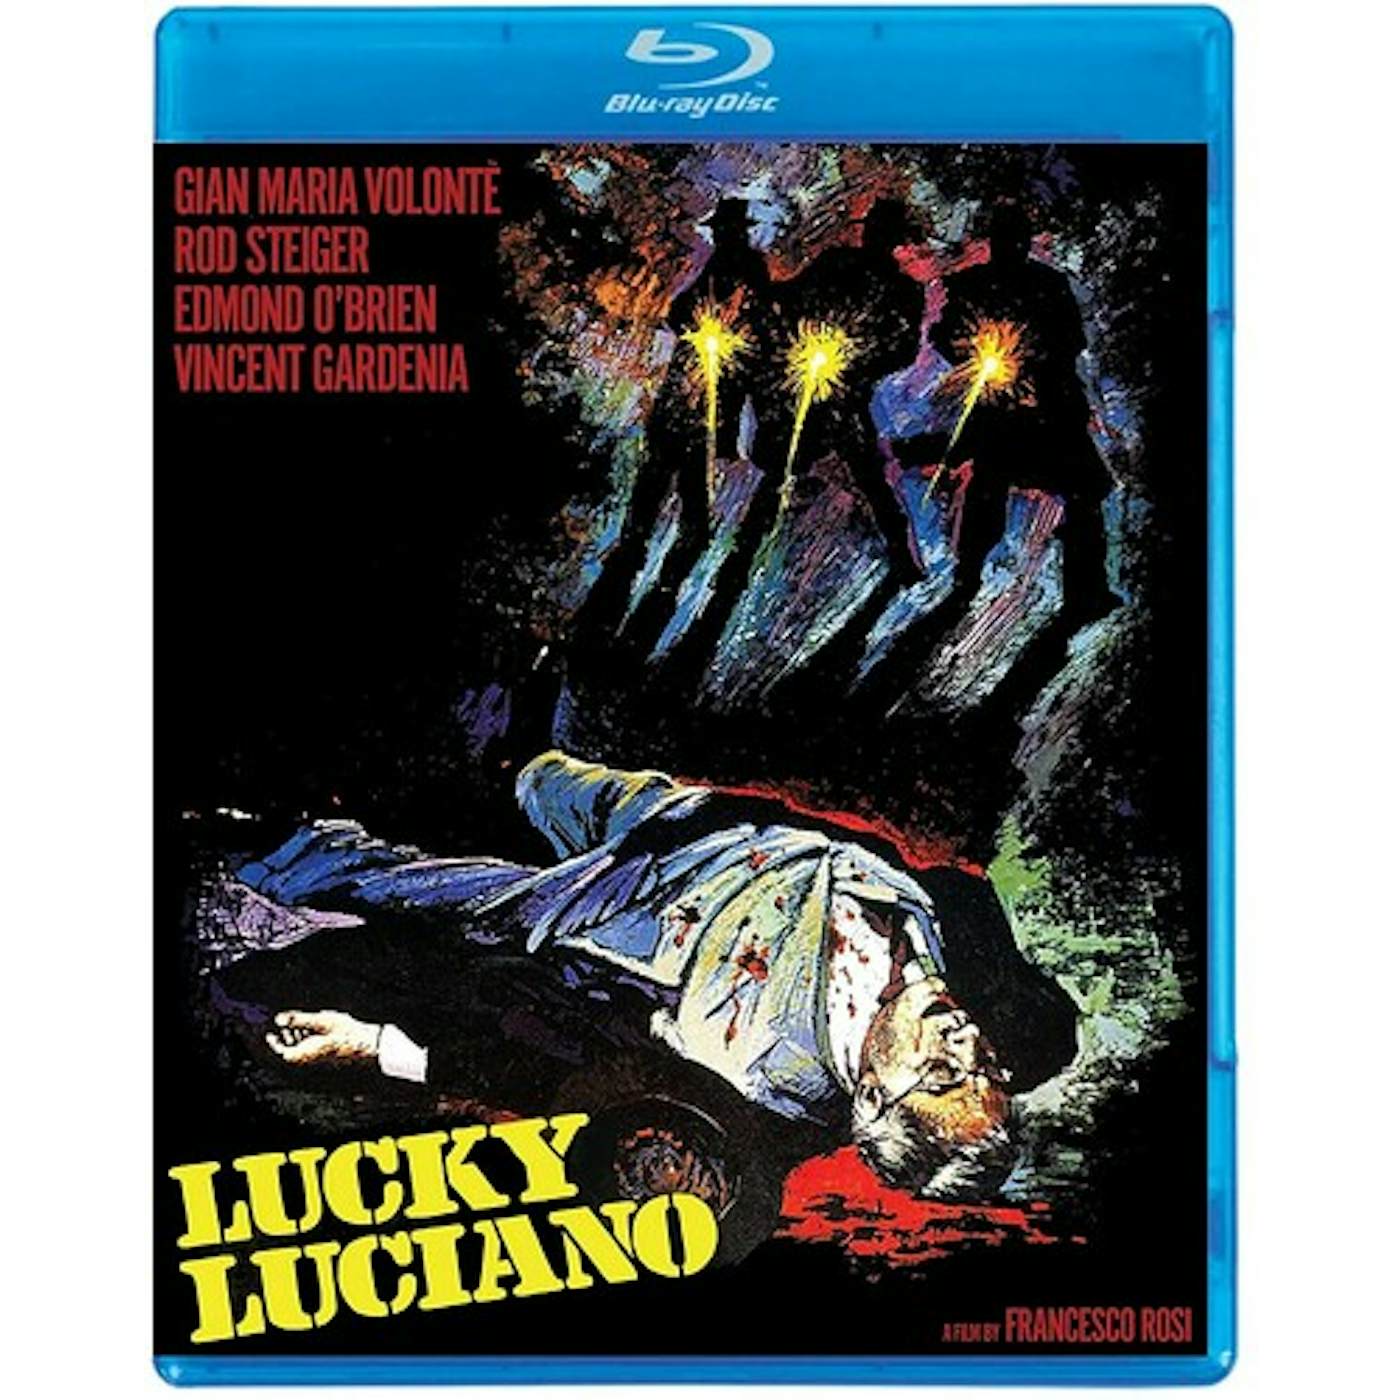 LUCKY LUCIANO (1973) Blu-ray